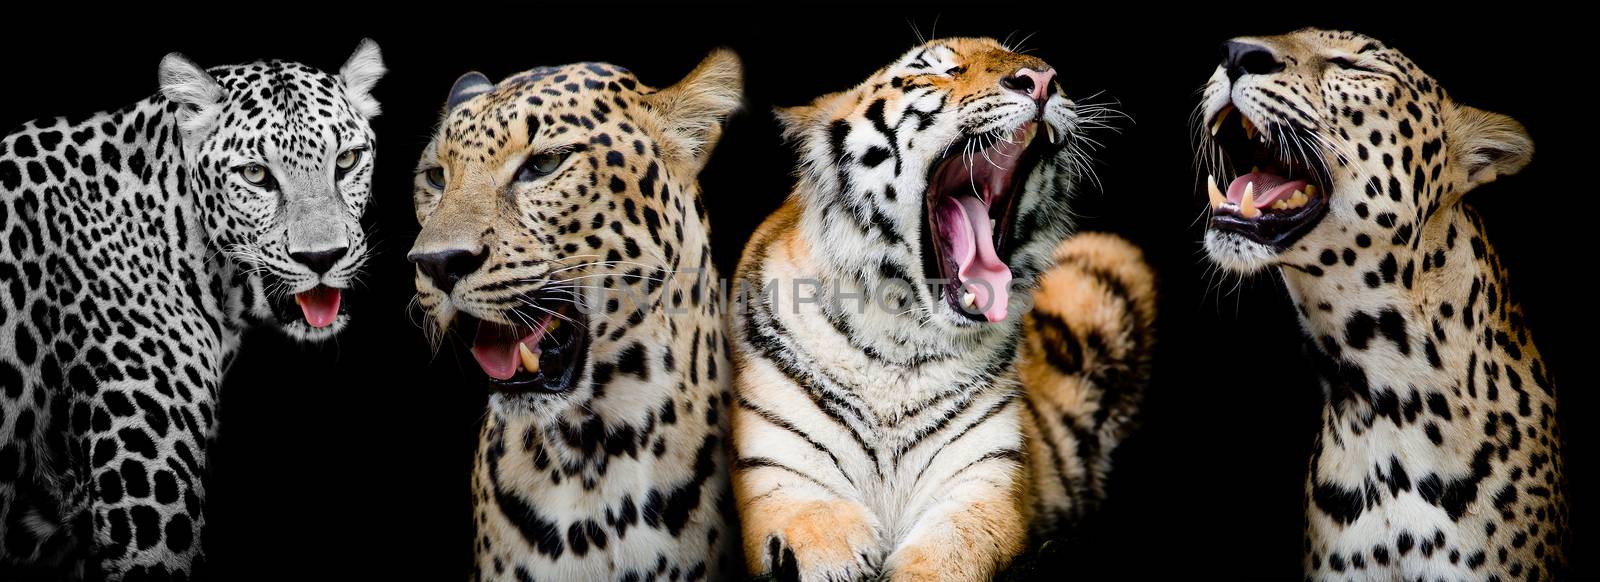 Collection of portraits of Tigers and Leopard.(And you could find more animals in my portfolio.)